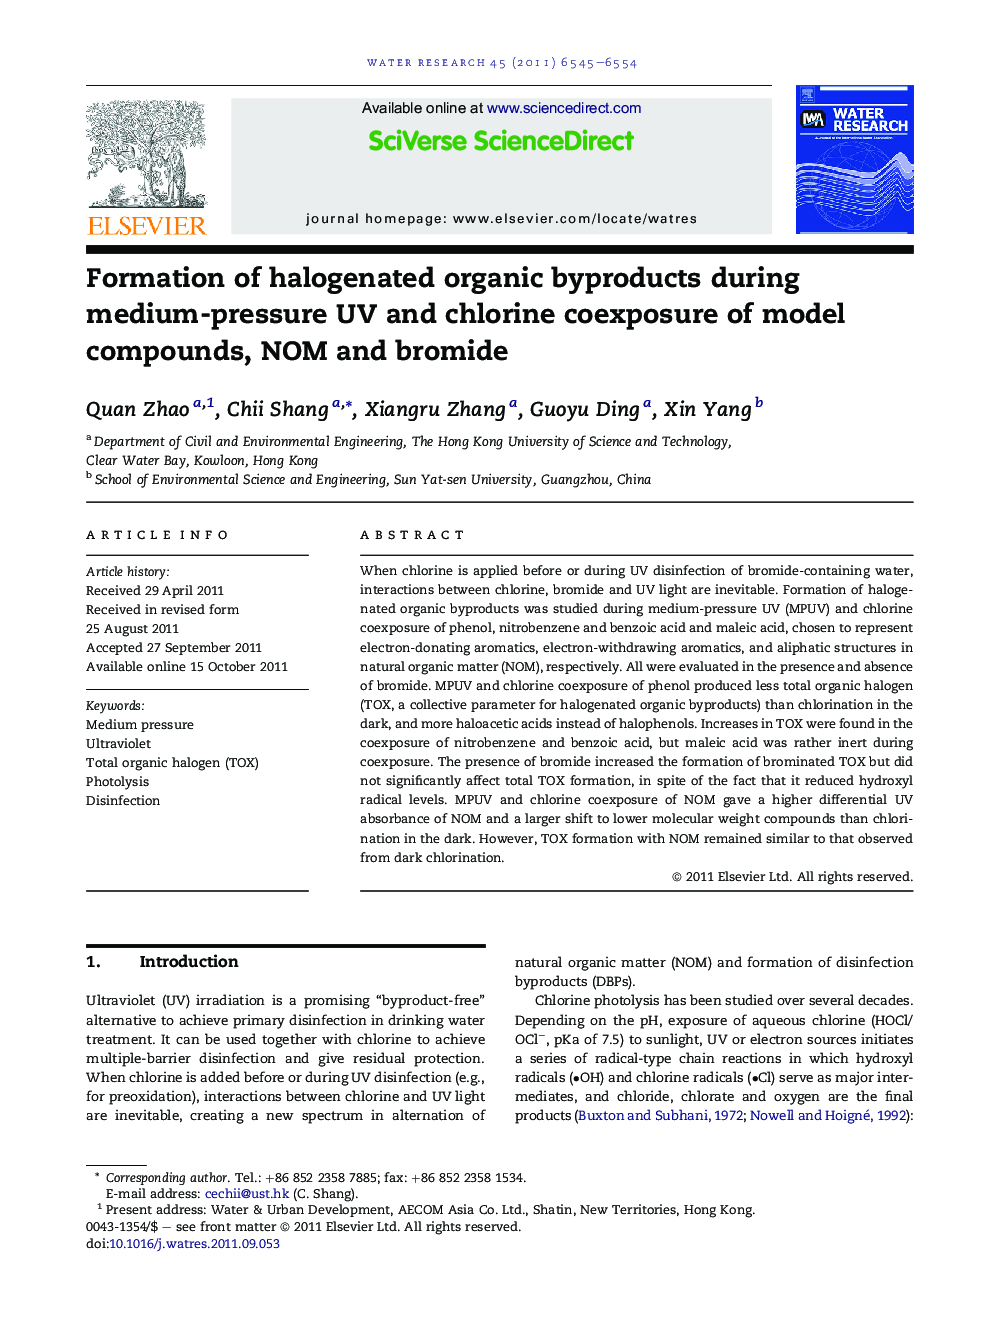 Formation of halogenated organic byproducts during medium-pressure UV and chlorine coexposure of model compounds, NOM and bromide